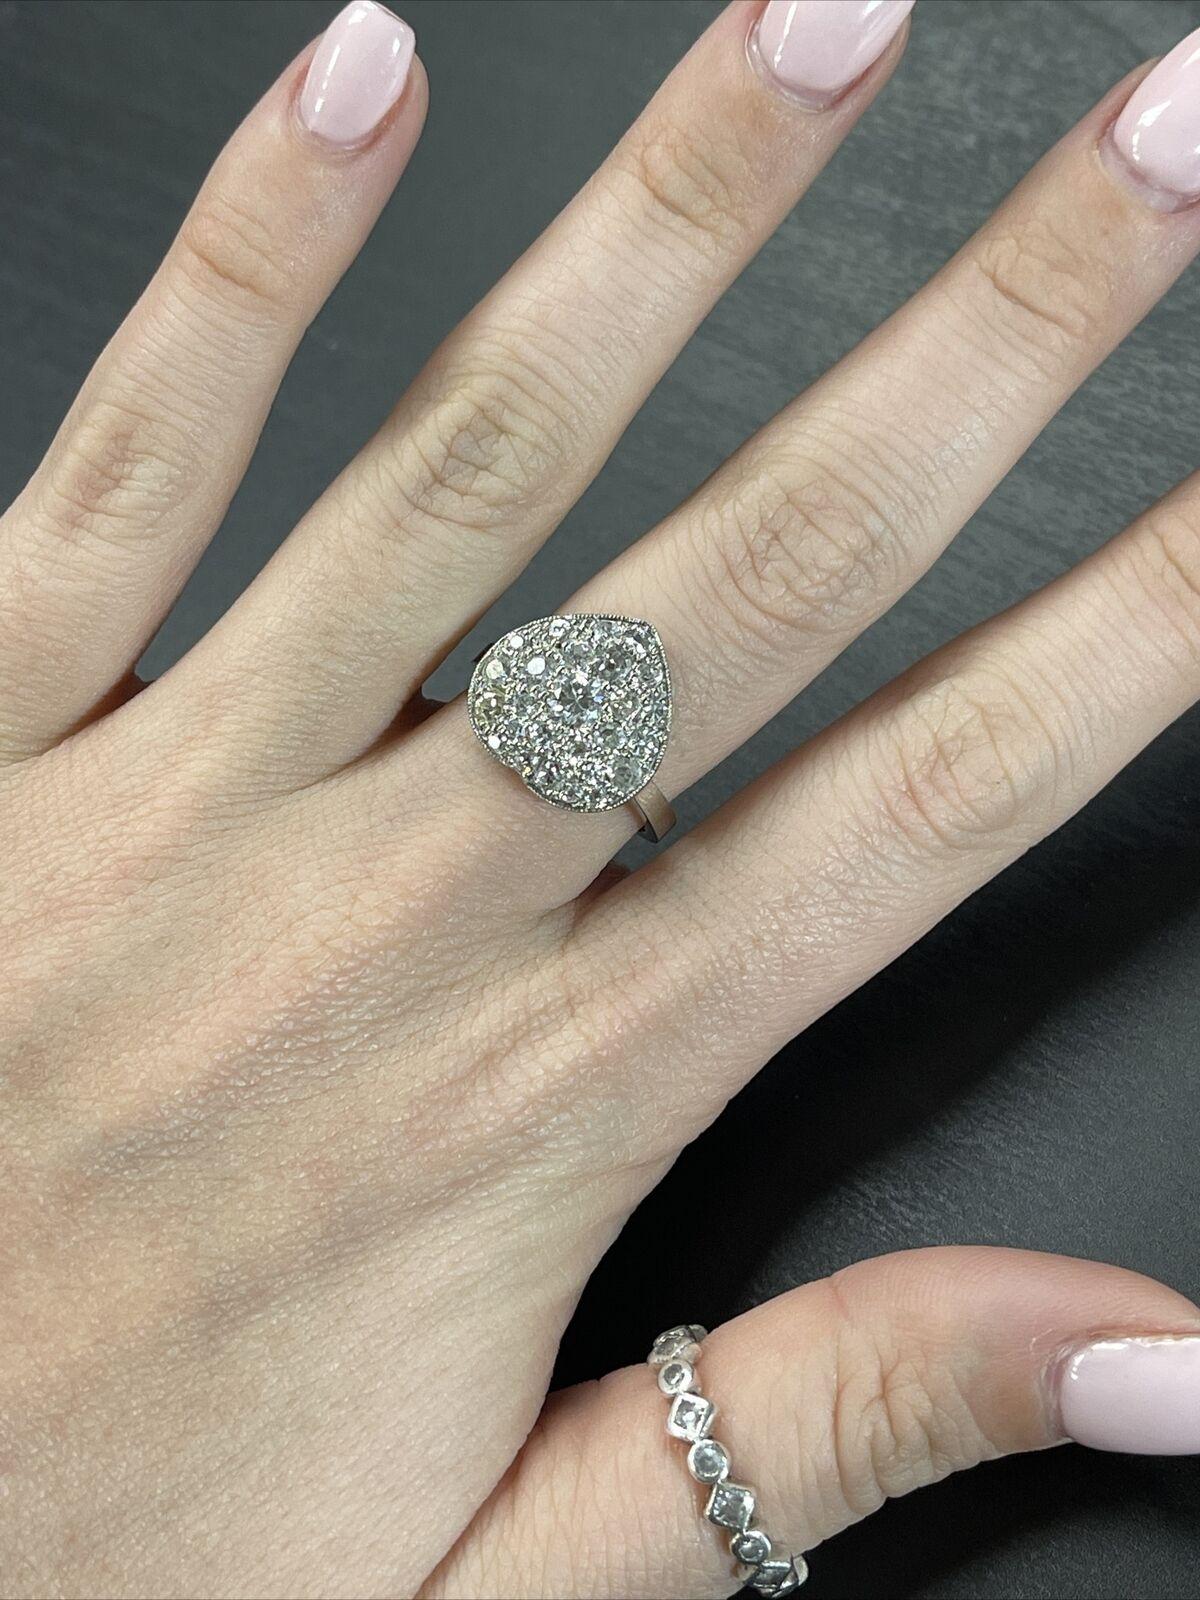 Presenting a

Platinum and Diamond Pave Old Mine Cut Diamond Heart Ring Size 7

A sparkling ring featuring 1.6 carats of natural mine cut diamonds pave set in a sold platinum dome heart shaped ring.

G-J color with VS-SI2 clarity. One diamond is